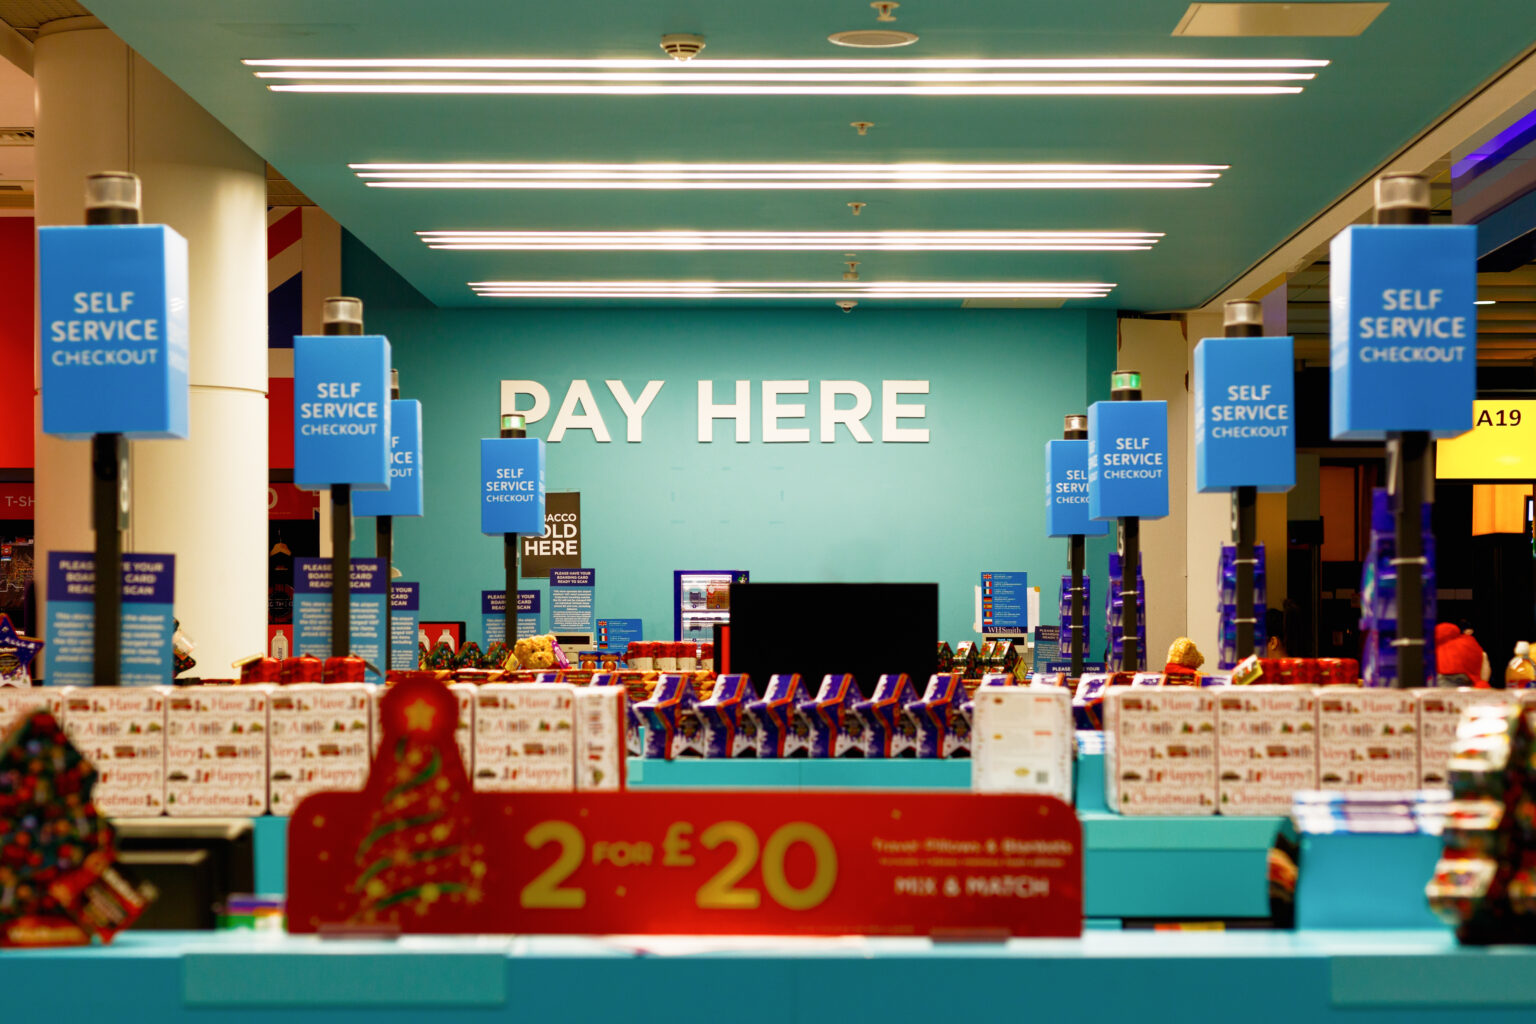 A busy store during the holiday season, with a large white ‘pay here’ sign over the general checkout area.